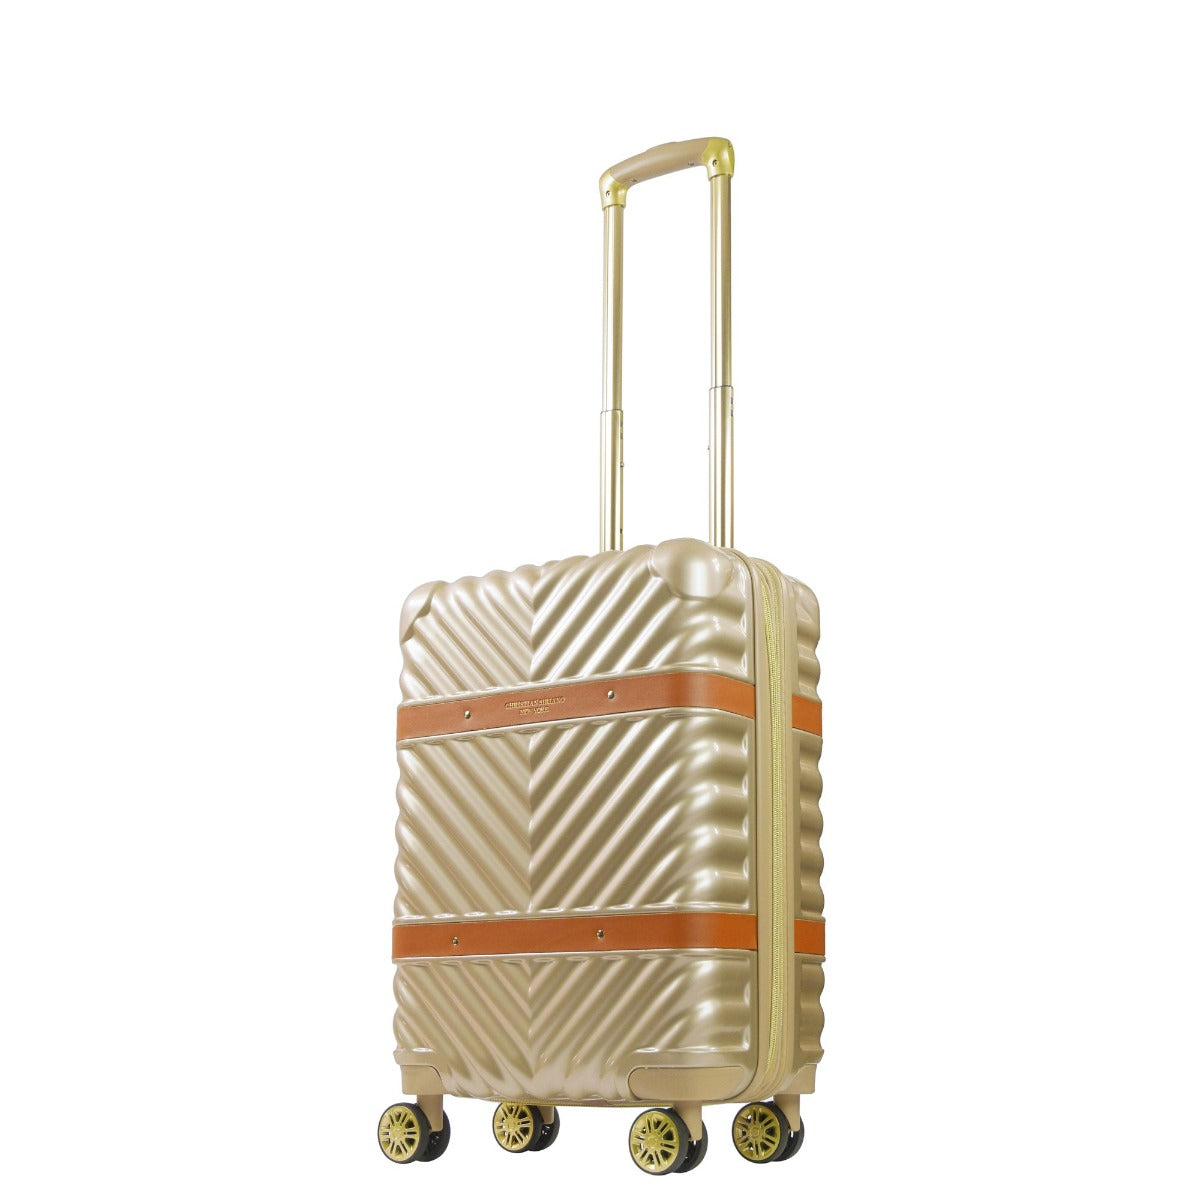 Christian Siriano New York Stella 22" carry on hardside spinner suitcase taupe - best durable luggage for travel